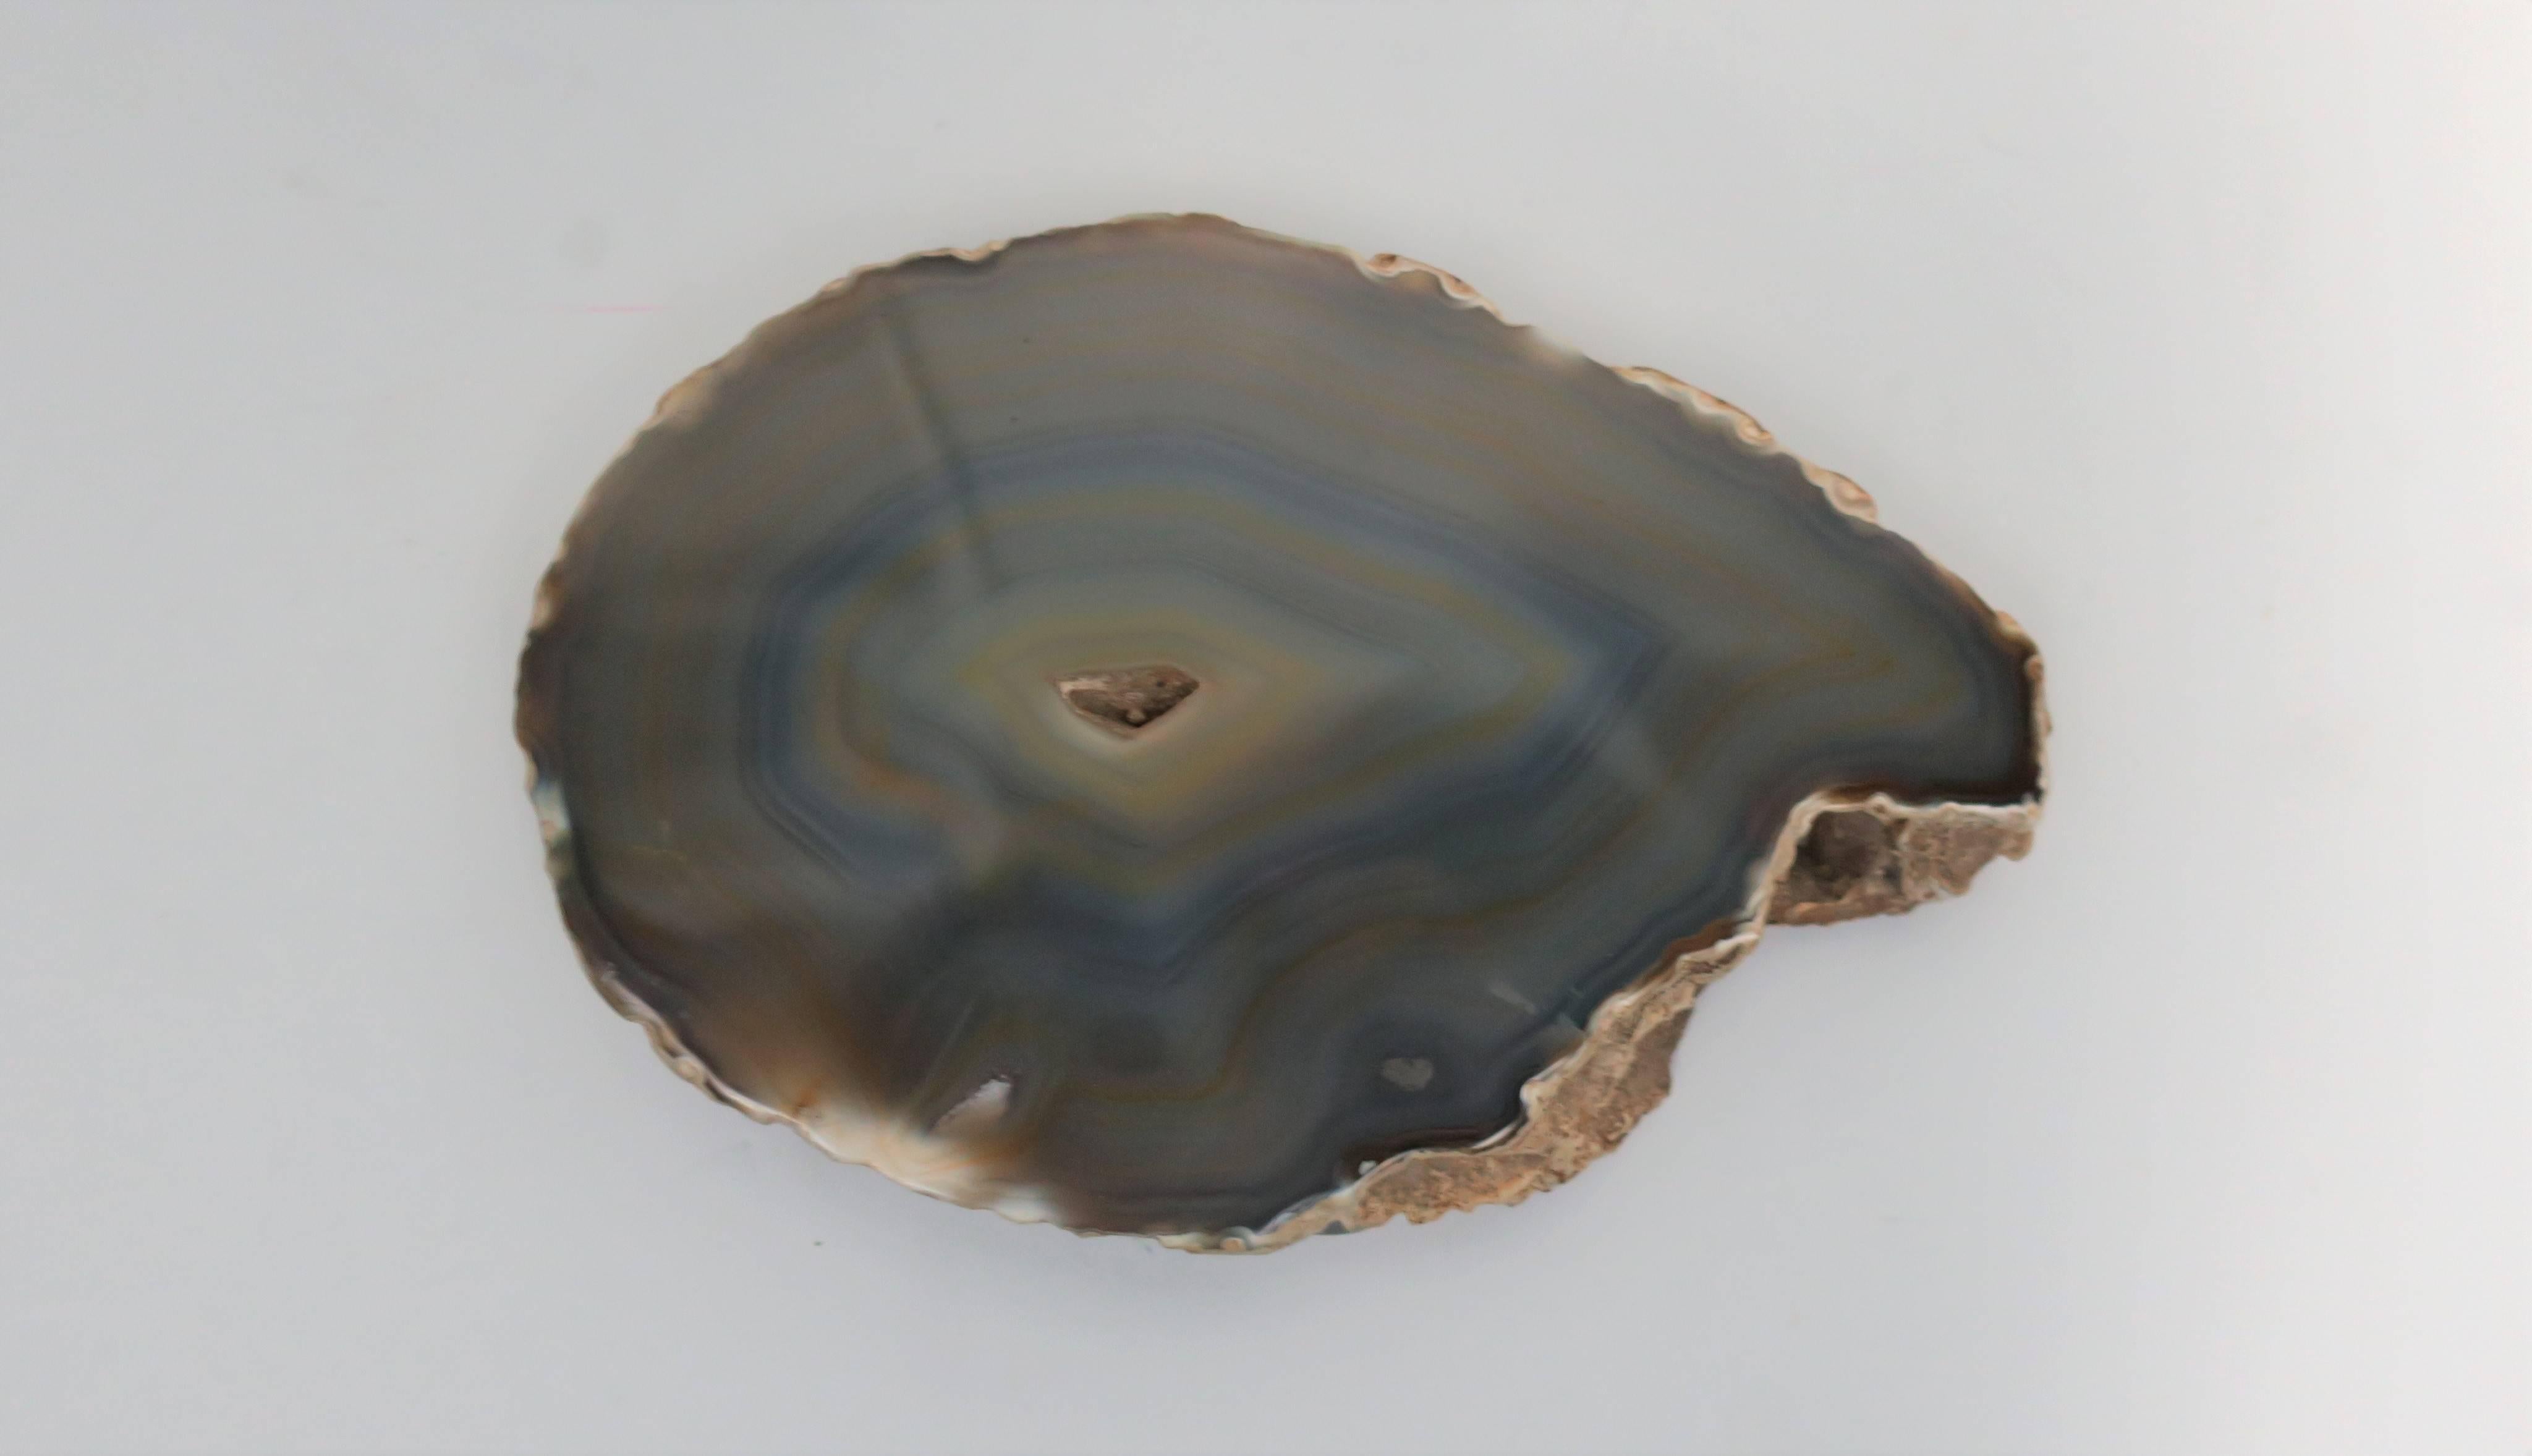 A beautiful and substantial polished natural agate onyx piece in shades of tan or sand and blue. Piece may be used as a paperweight, decorative object on a shelf, table, desk, etc., or as a display piece. 

Piece measures: 1.25 in. H x 4.75 in. D x